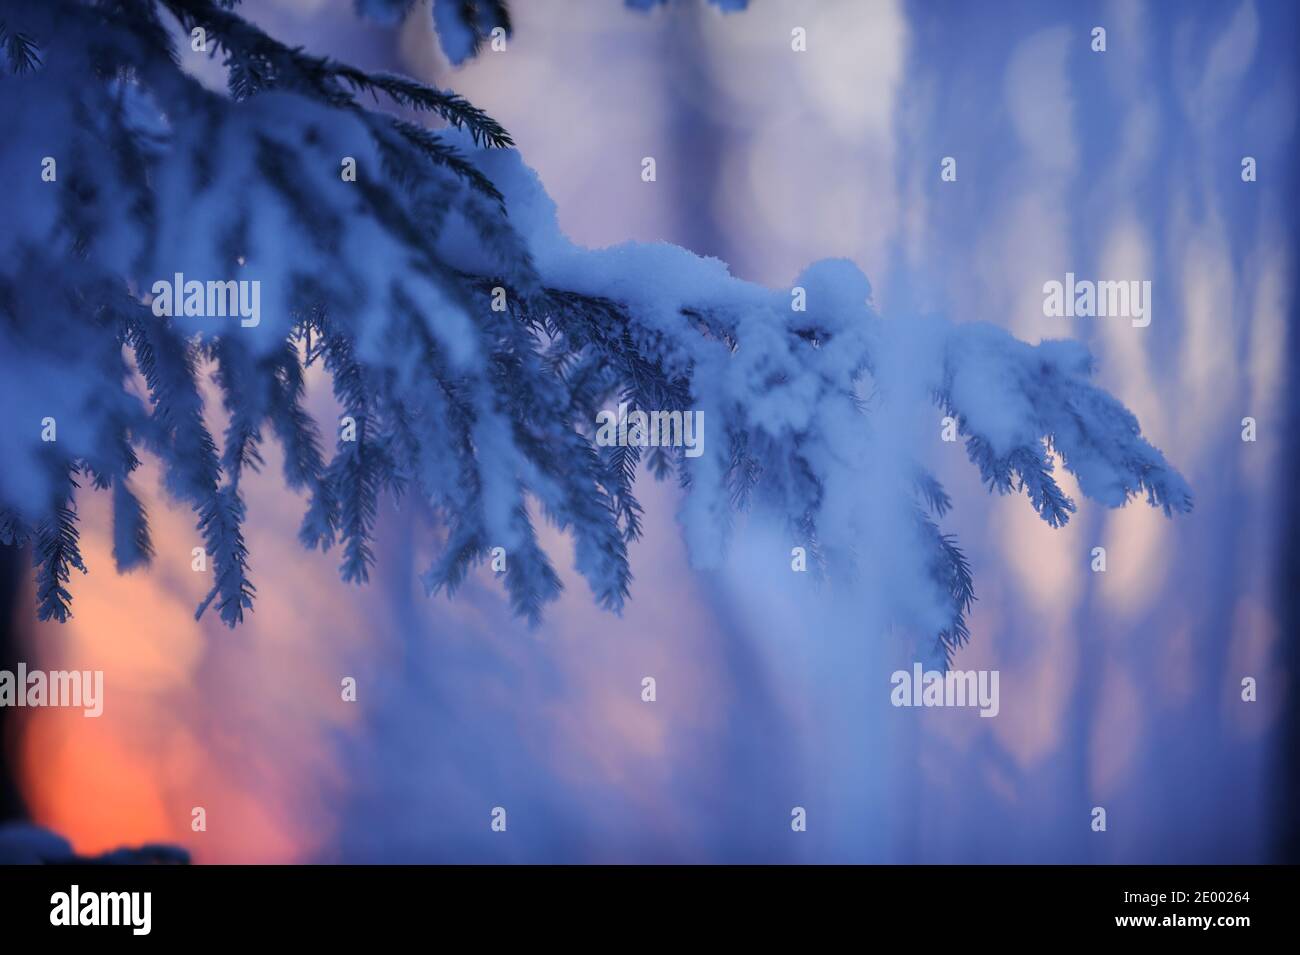 Winter forest at dusk. Last glimpse of setting sun behind snow covered spruce (Picea abies) branches. Selective focus and shallow depth of field. Stock Photo